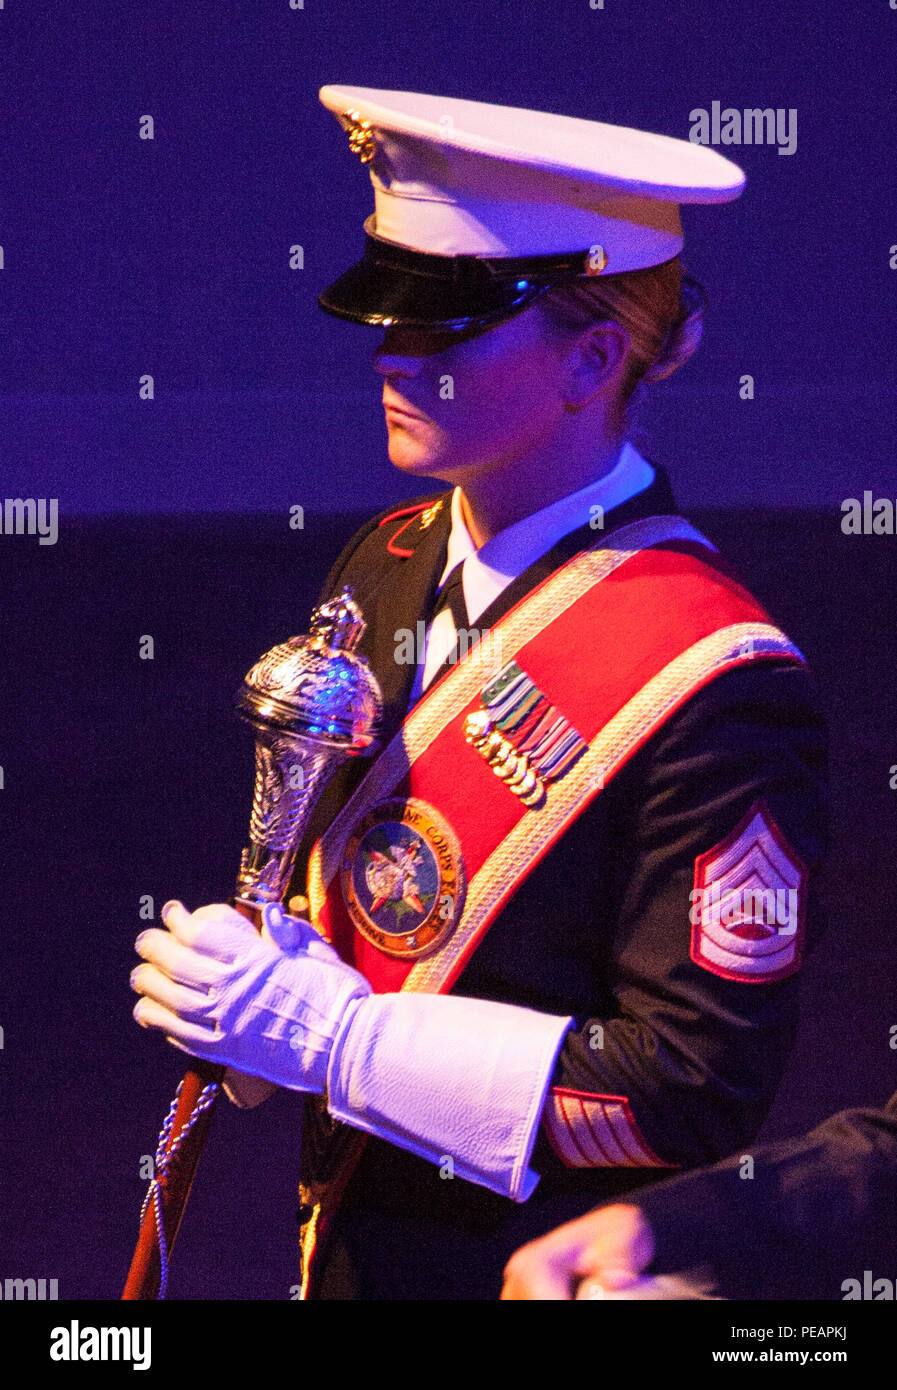 U.S. Marine Gunnery Sgt. Stacie Beebe, Drum Major, with Marine Corps Band New Orleans performs for the celebration of the 240th Marine Corps Birthday Ball at Mardi Gras World, New Orleans, La., Nov. 21, 2015. This year’s celebration honors those past, present, and future Marines throughout history and marks the 240th Marine Corps Birthday since its founding on Nov. 10, 1775. (U.S. Marine Corps photo by Kimberly Aguirre/Released) Stock Photo